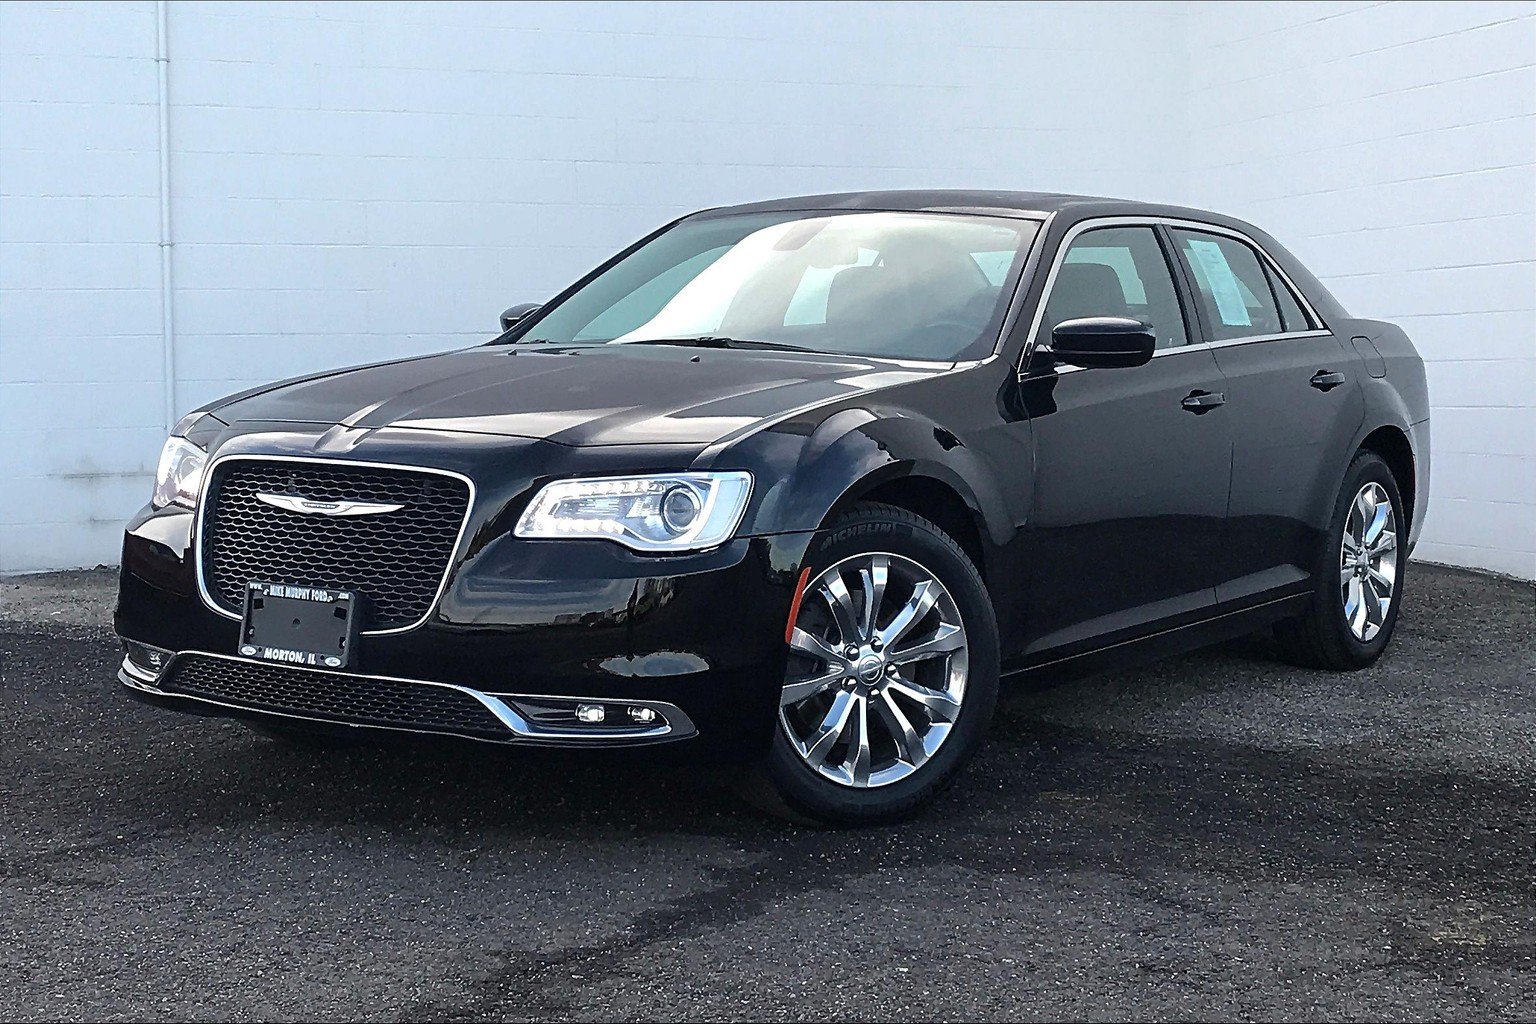 PreOwned 2016 Chrysler 300 4dr Sdn Anniversary Edition